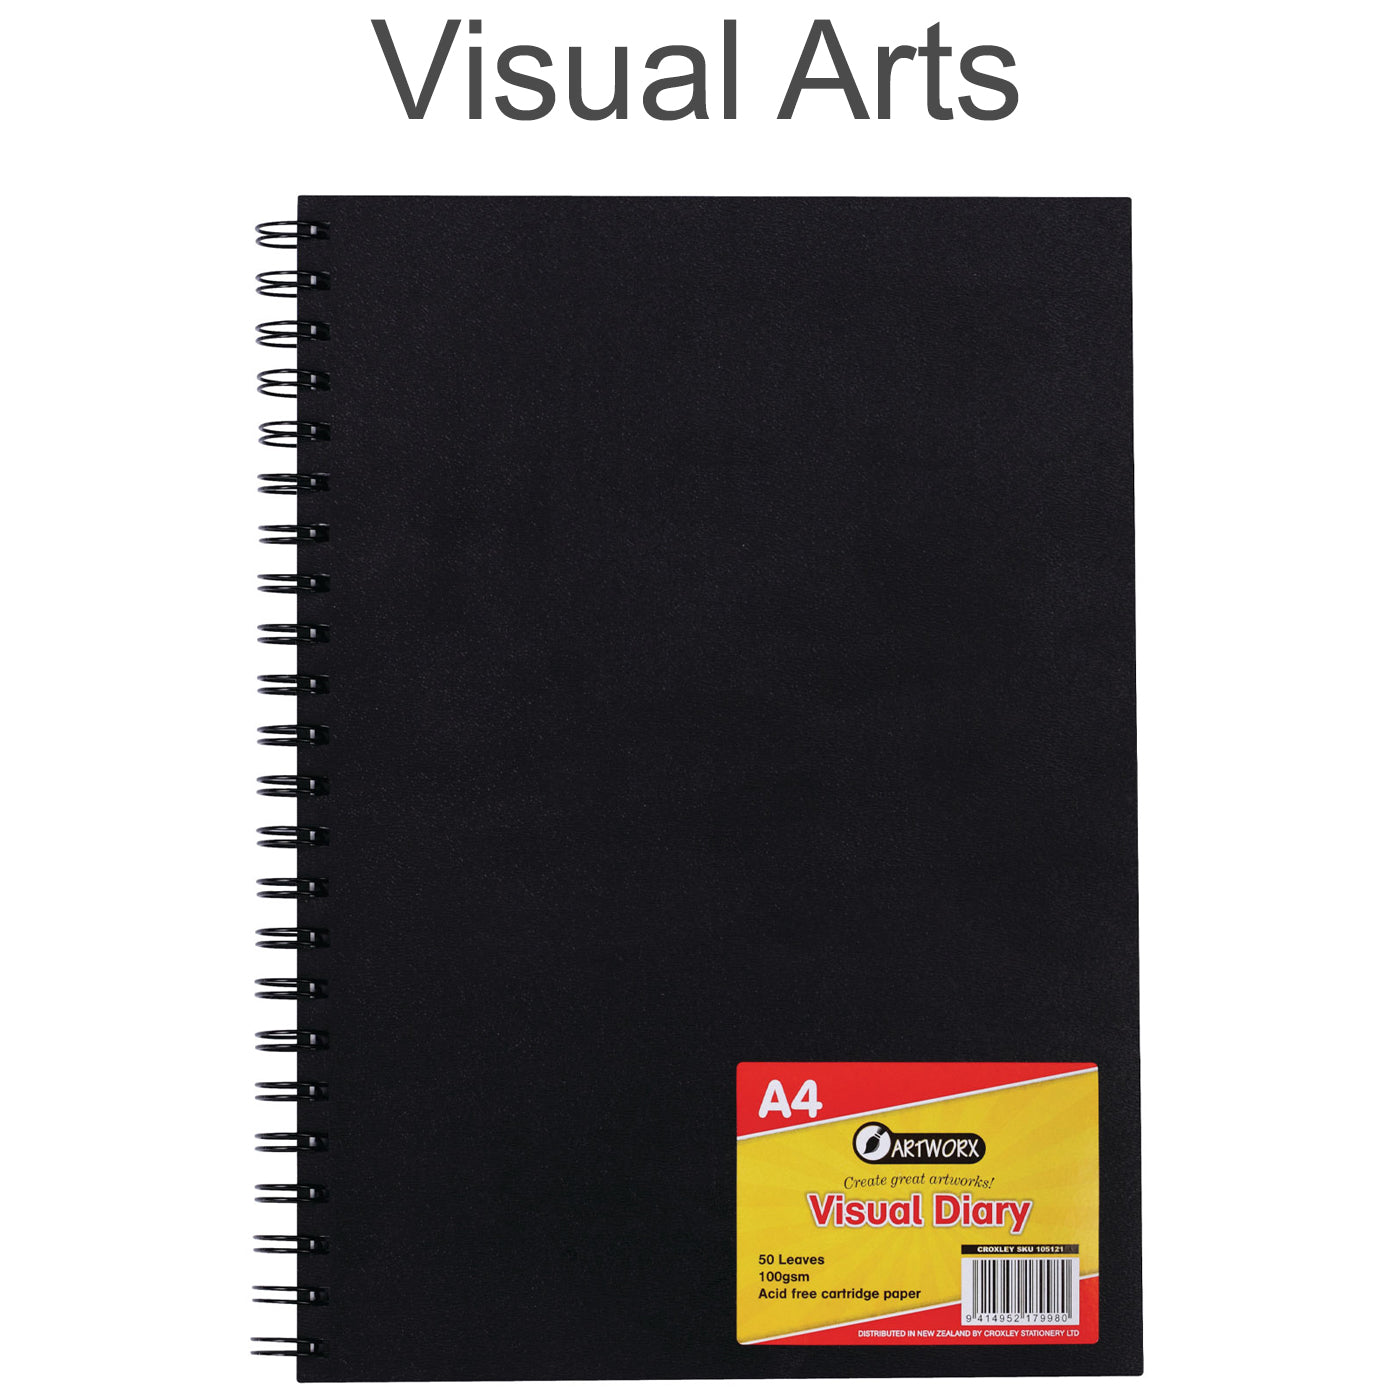 Artworx Visual Diary A4 100 Pages [100 GSM]